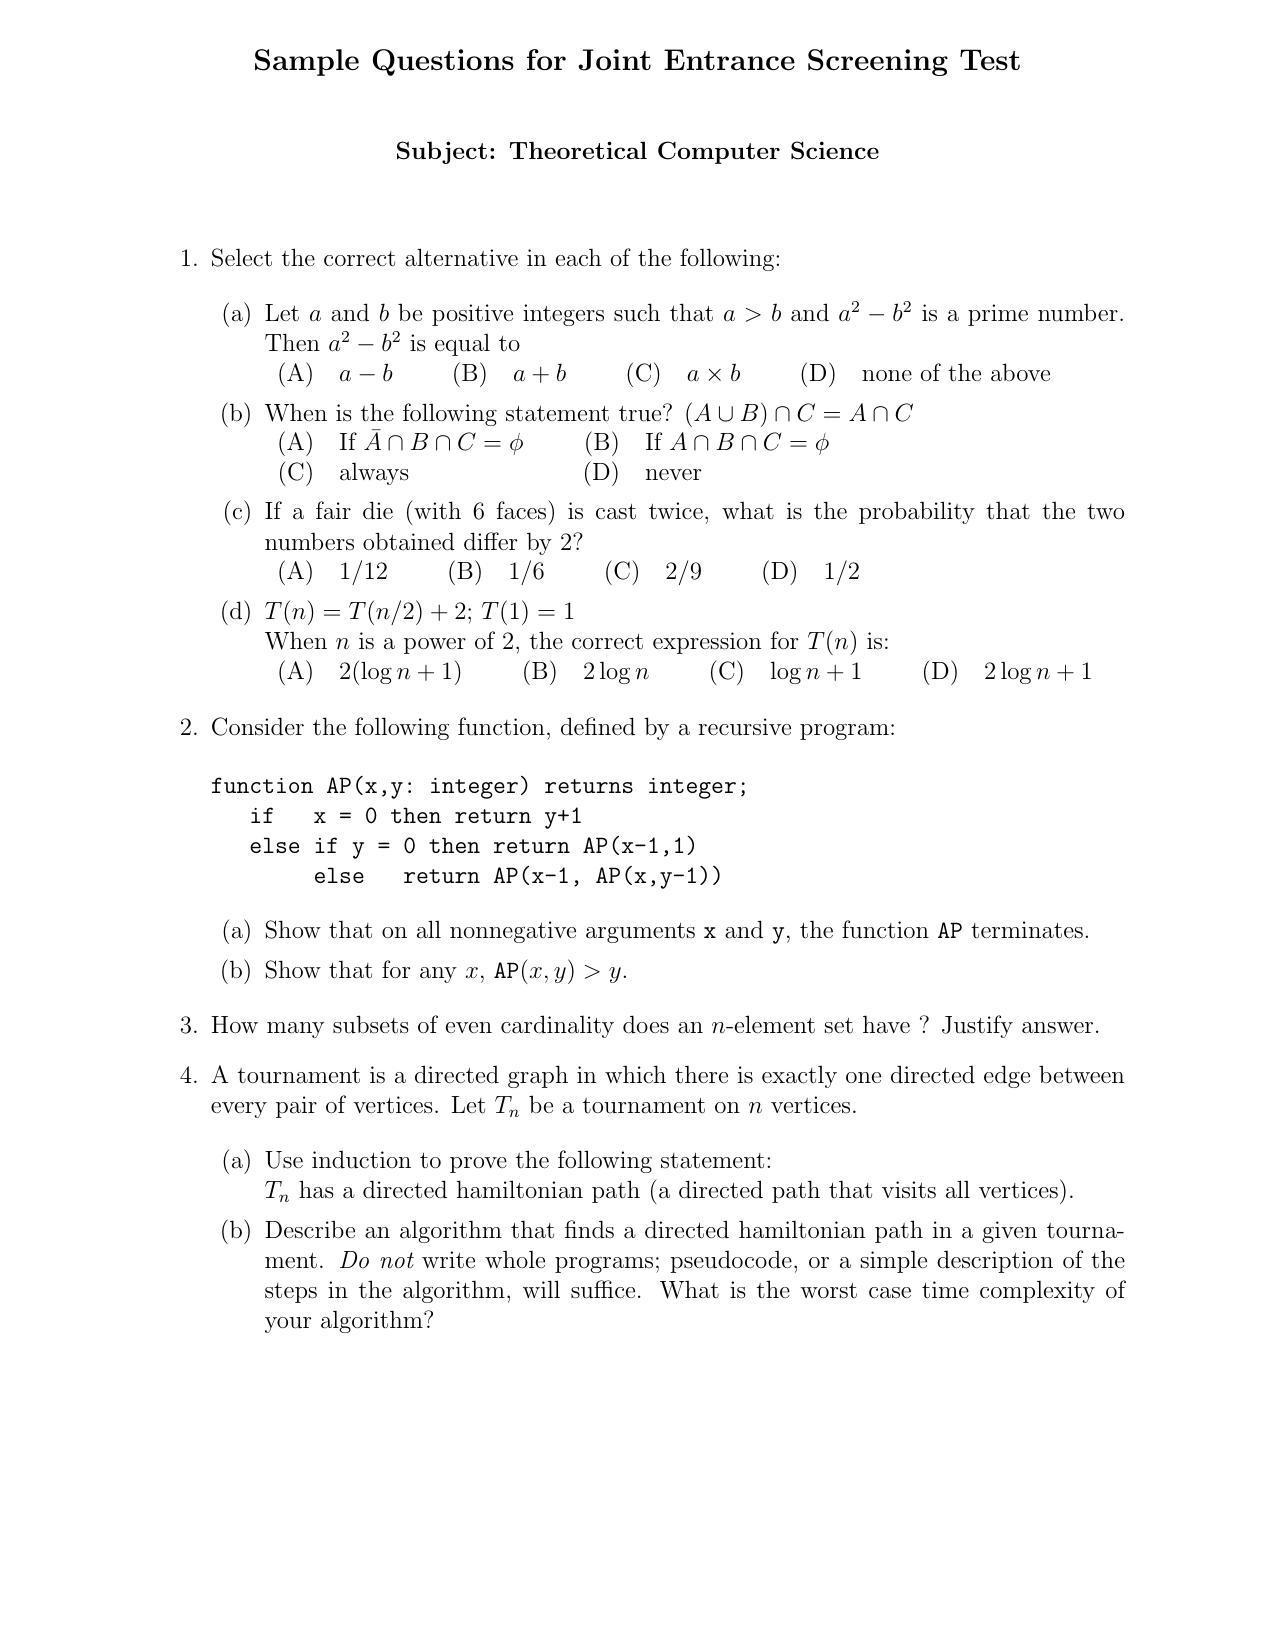 JEST TCS (Theoretical Computer Science) Sample Paper - Page 3